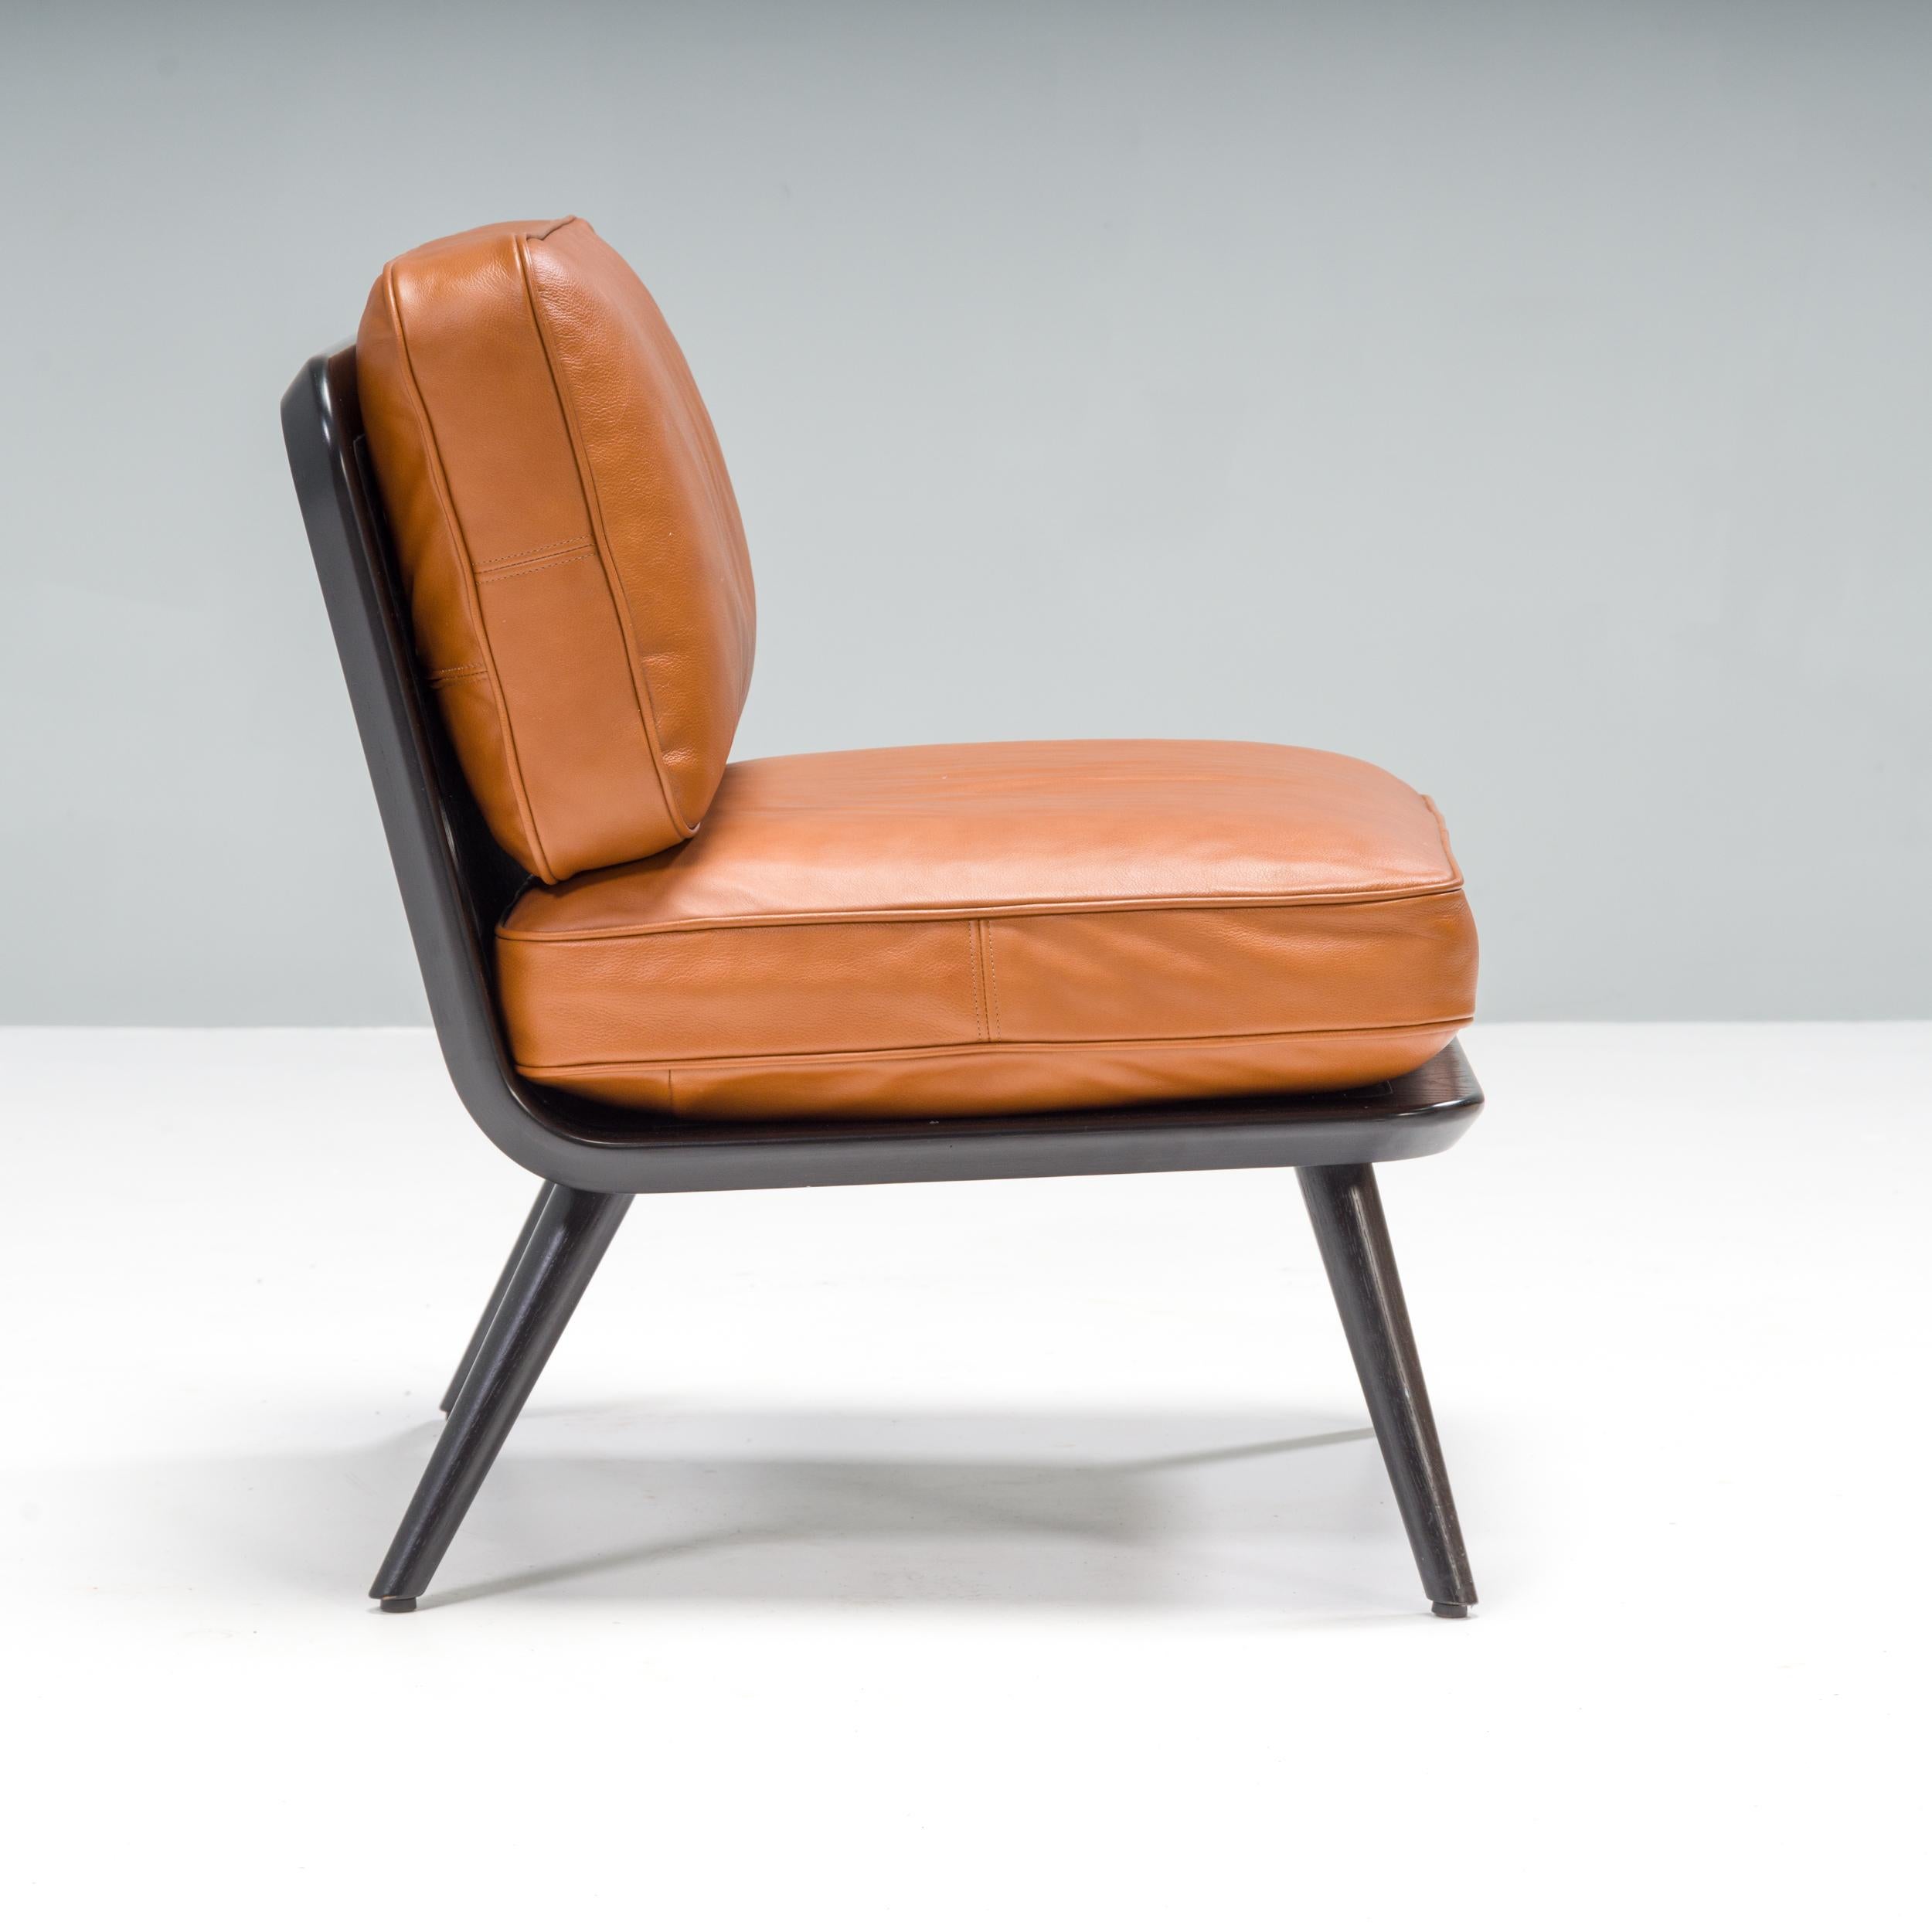 Scandinavian Modern Fredericia by Space Copenhagen Tan Leather Spine Lounge Chair